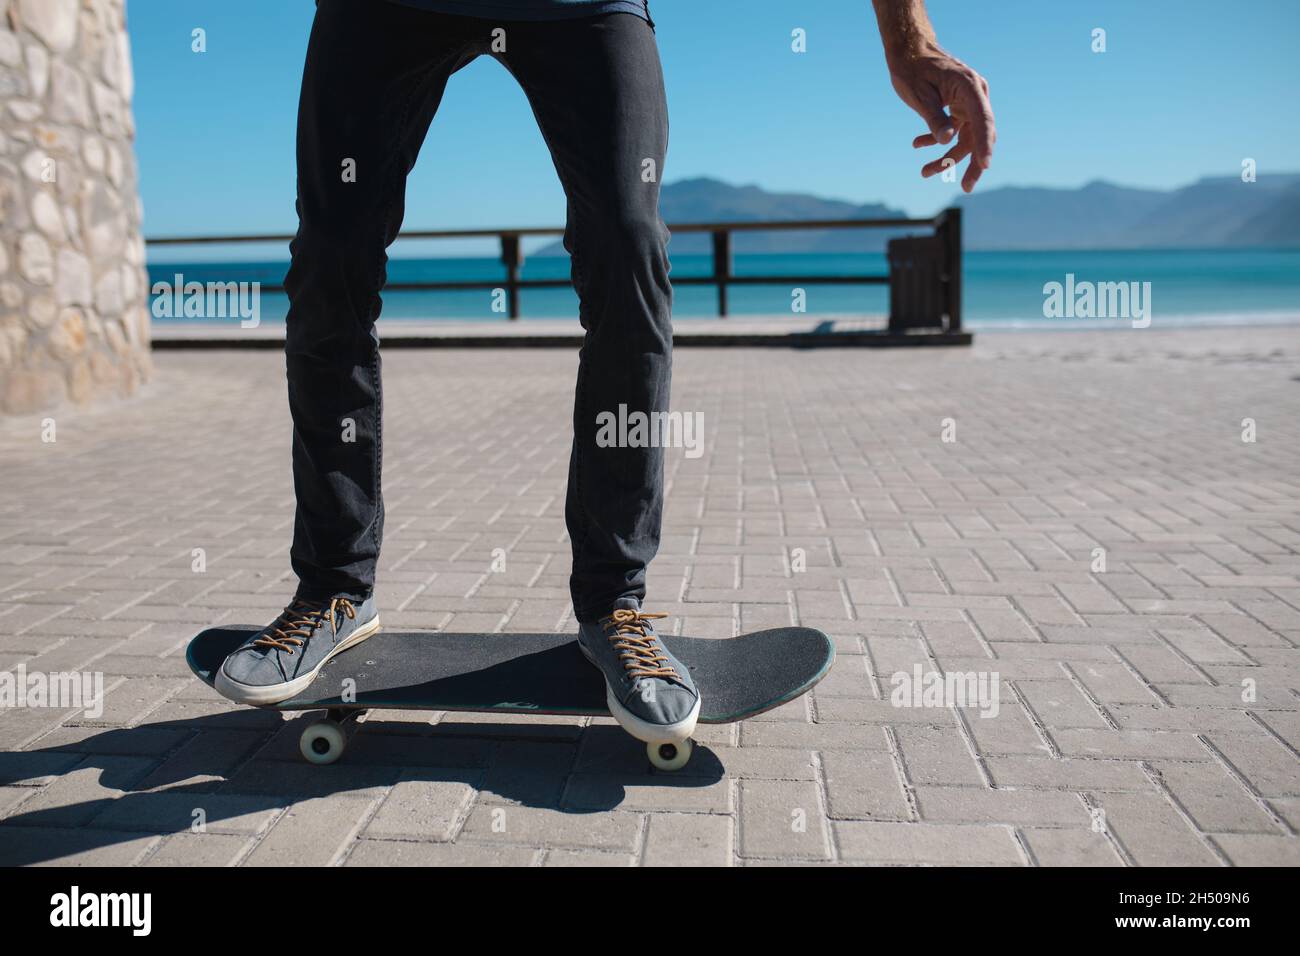 Low section of man skateboarding on promenade against sky during sunny day Stock Photo